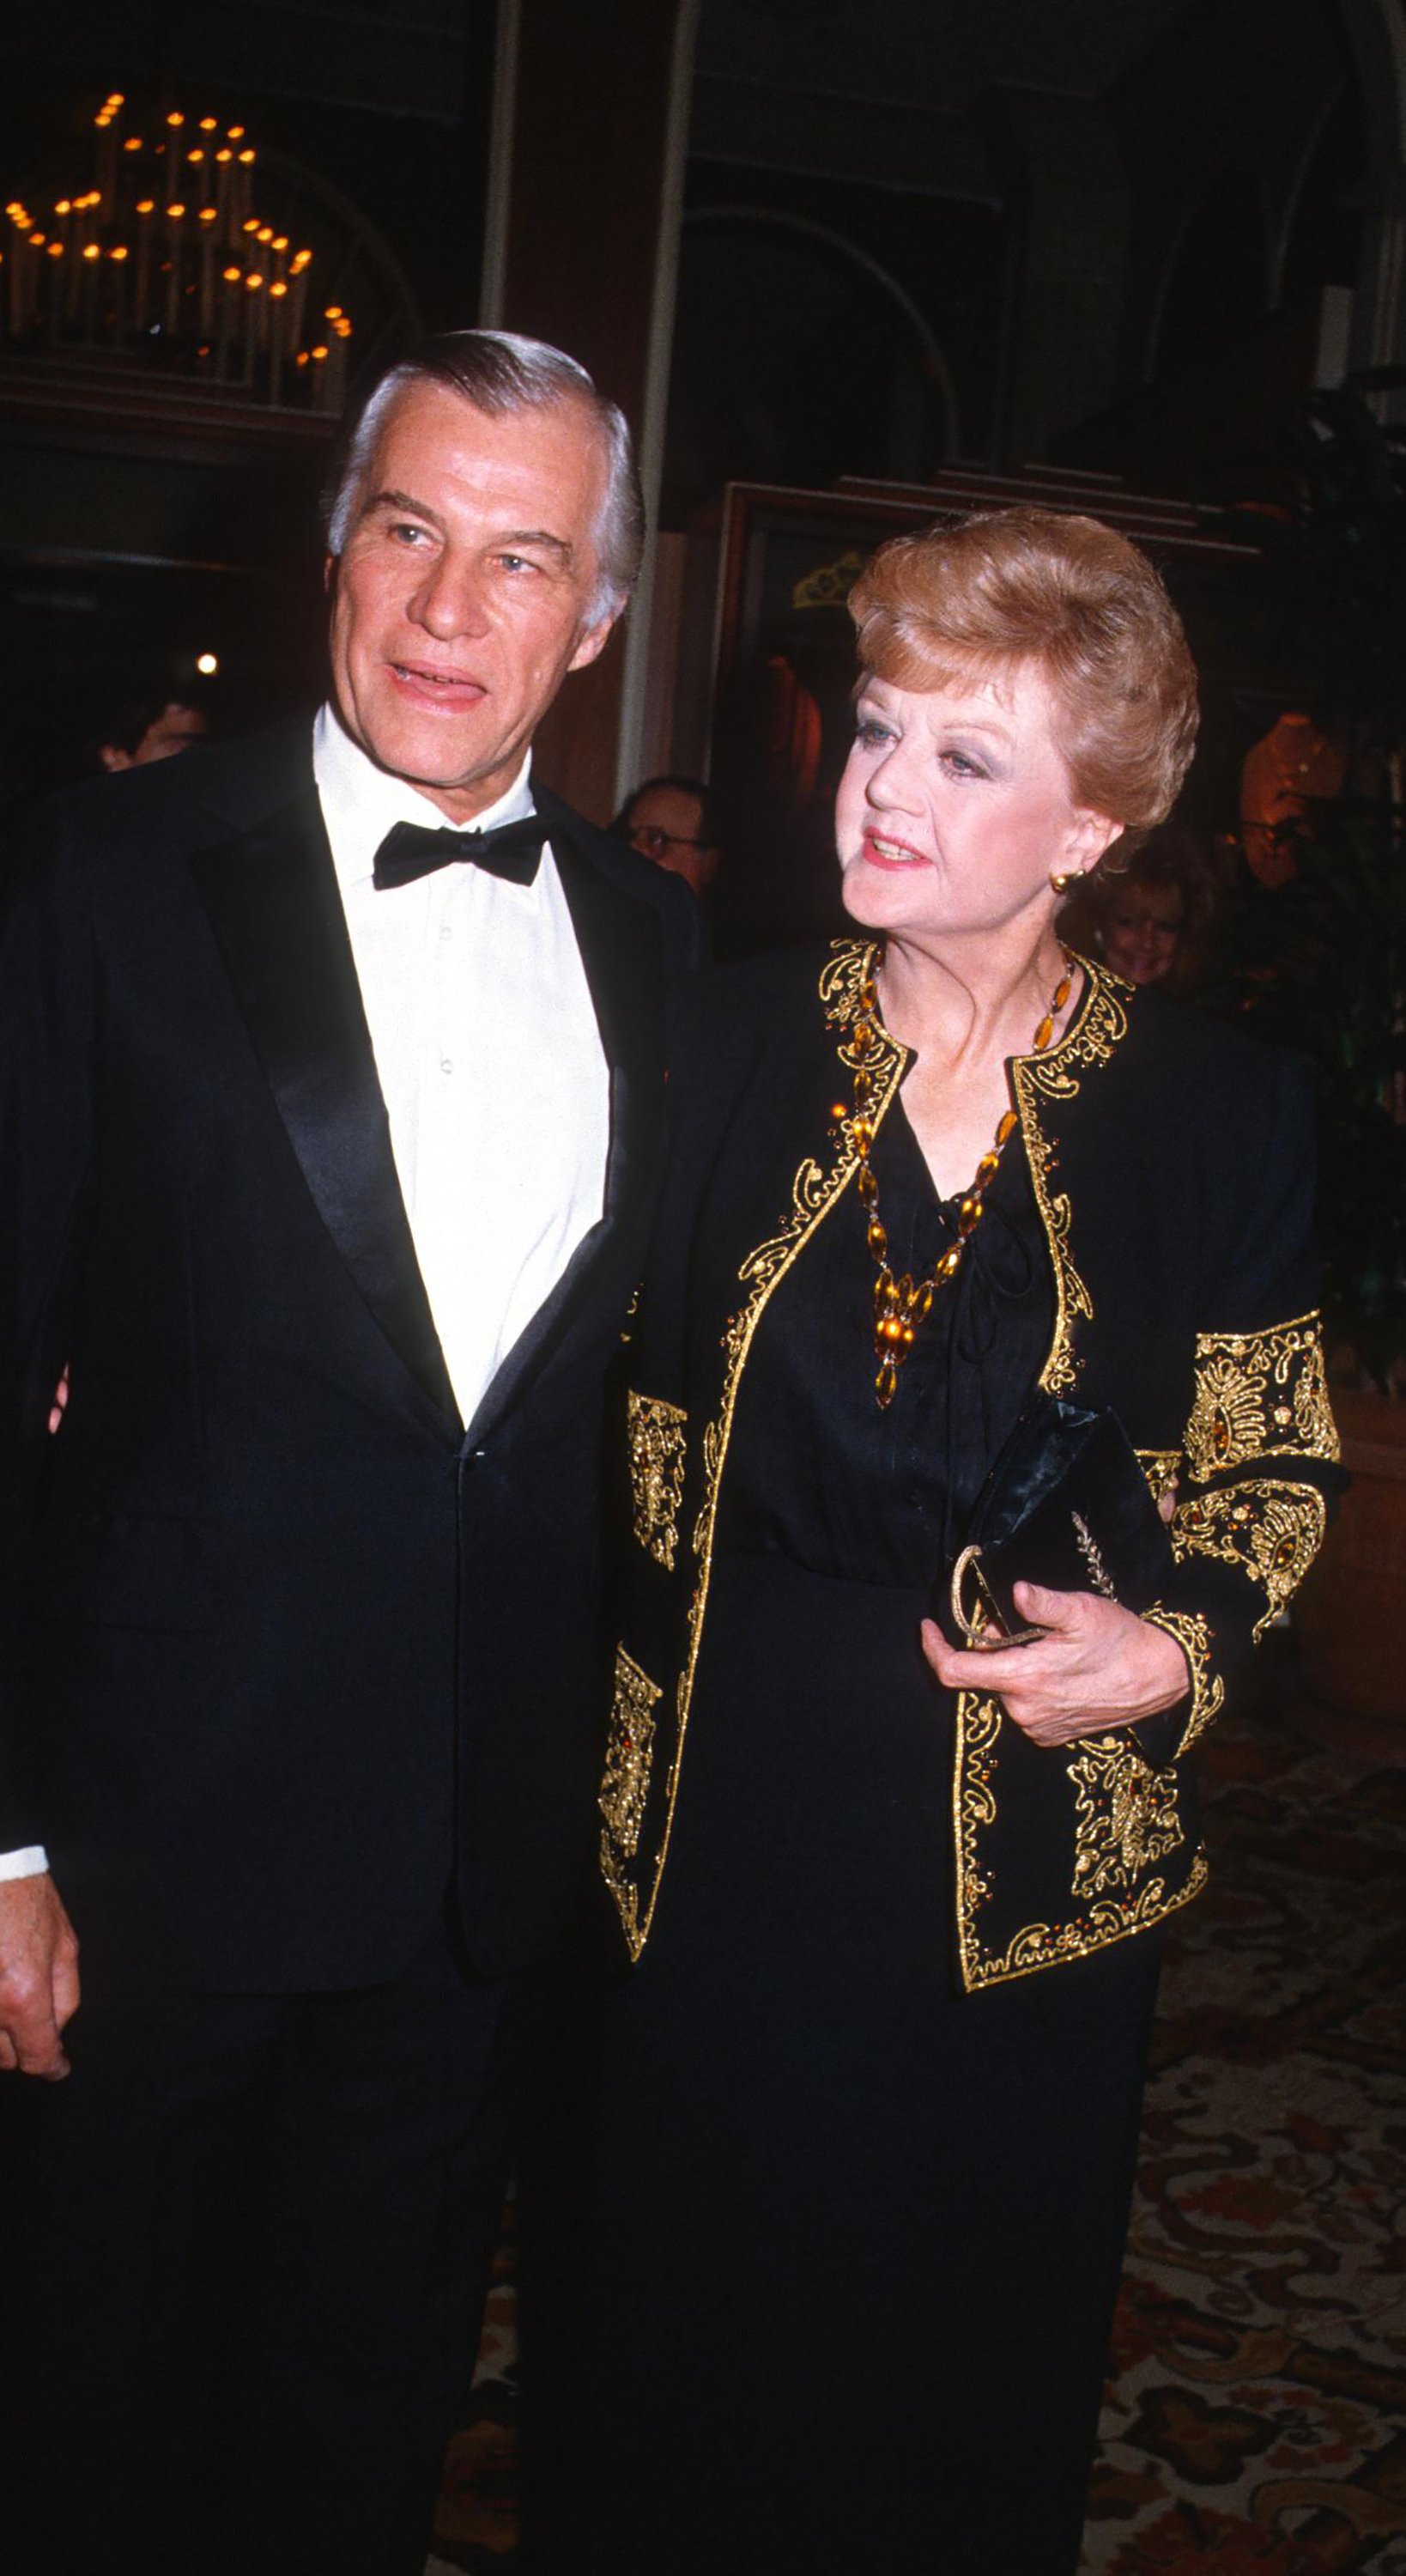 Peter Shaw and Angela Lansbury attend 42nd Annual Golden Globe Awards at the Beverly Hilton Hotel in Beverly Hills, California on January 26, 1985. | Source: Getty Images